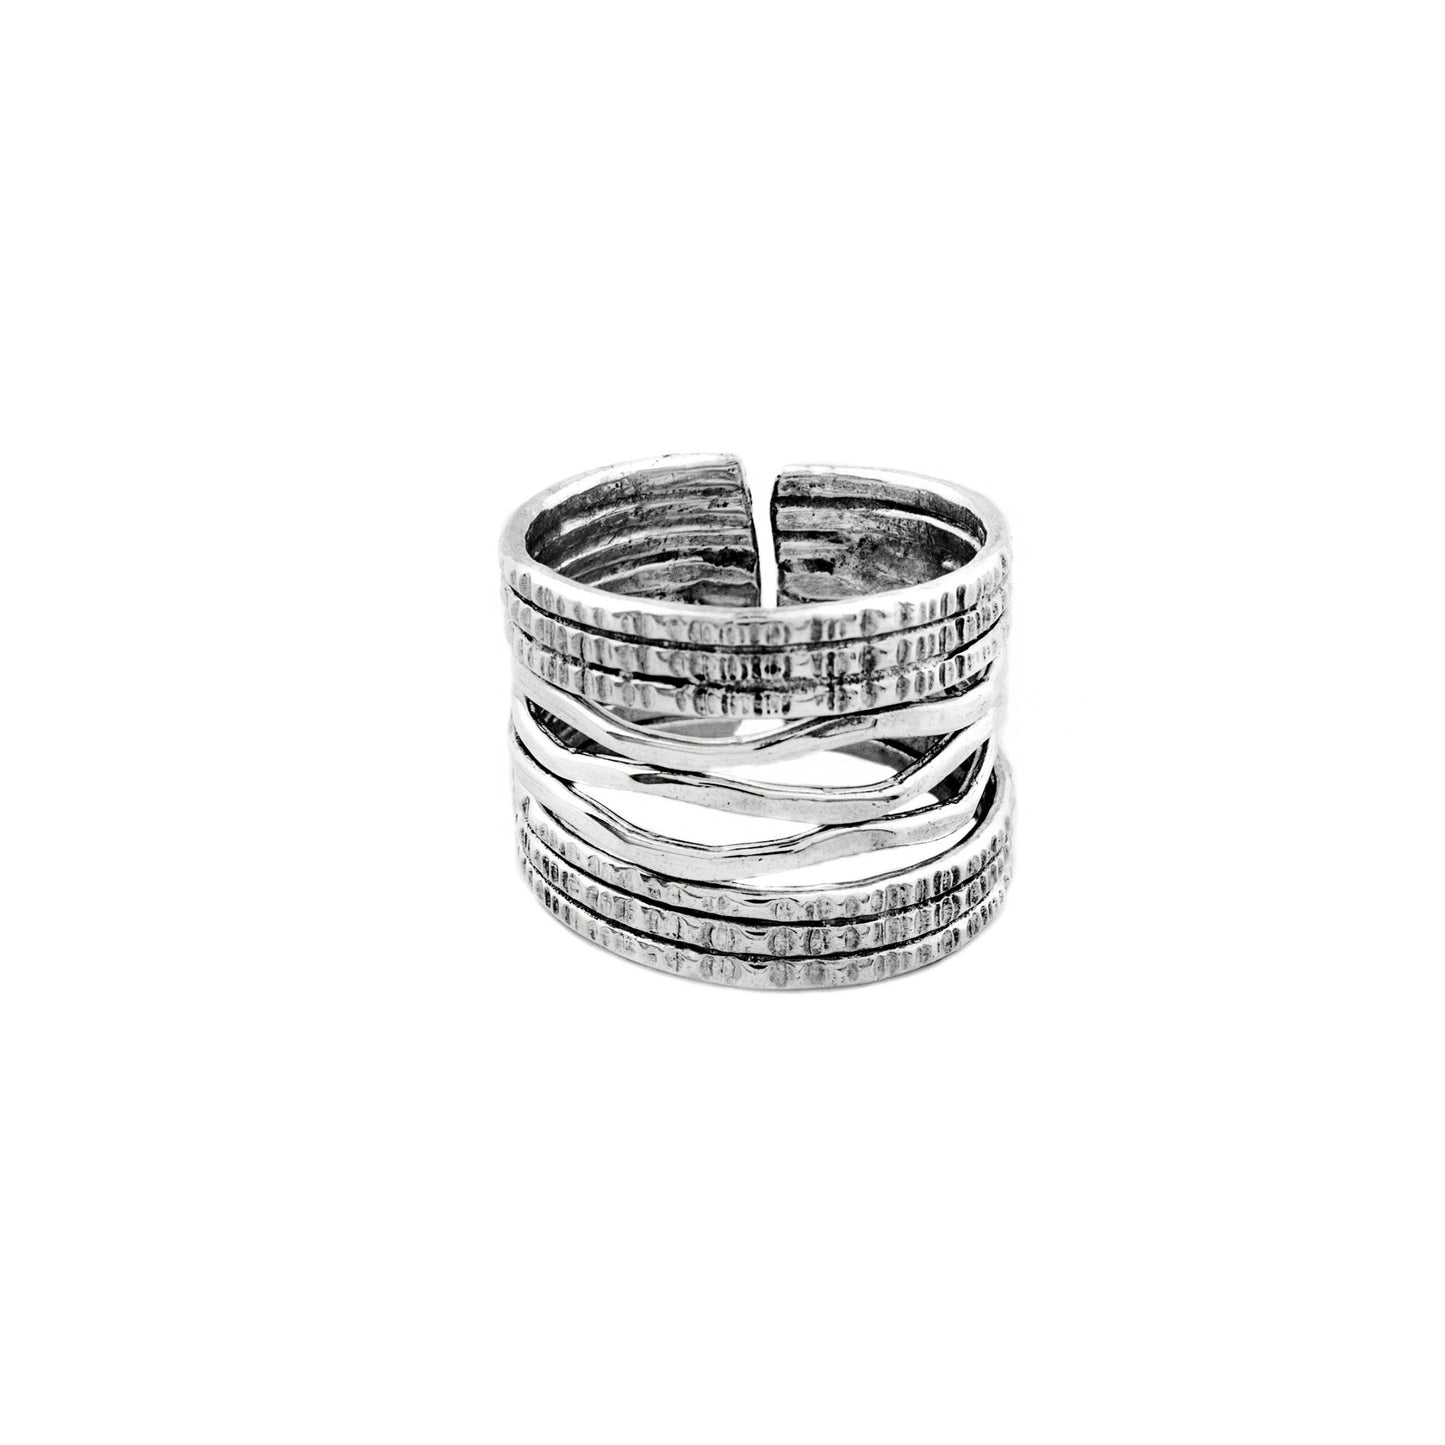 Rustic Sterling Silver Ring